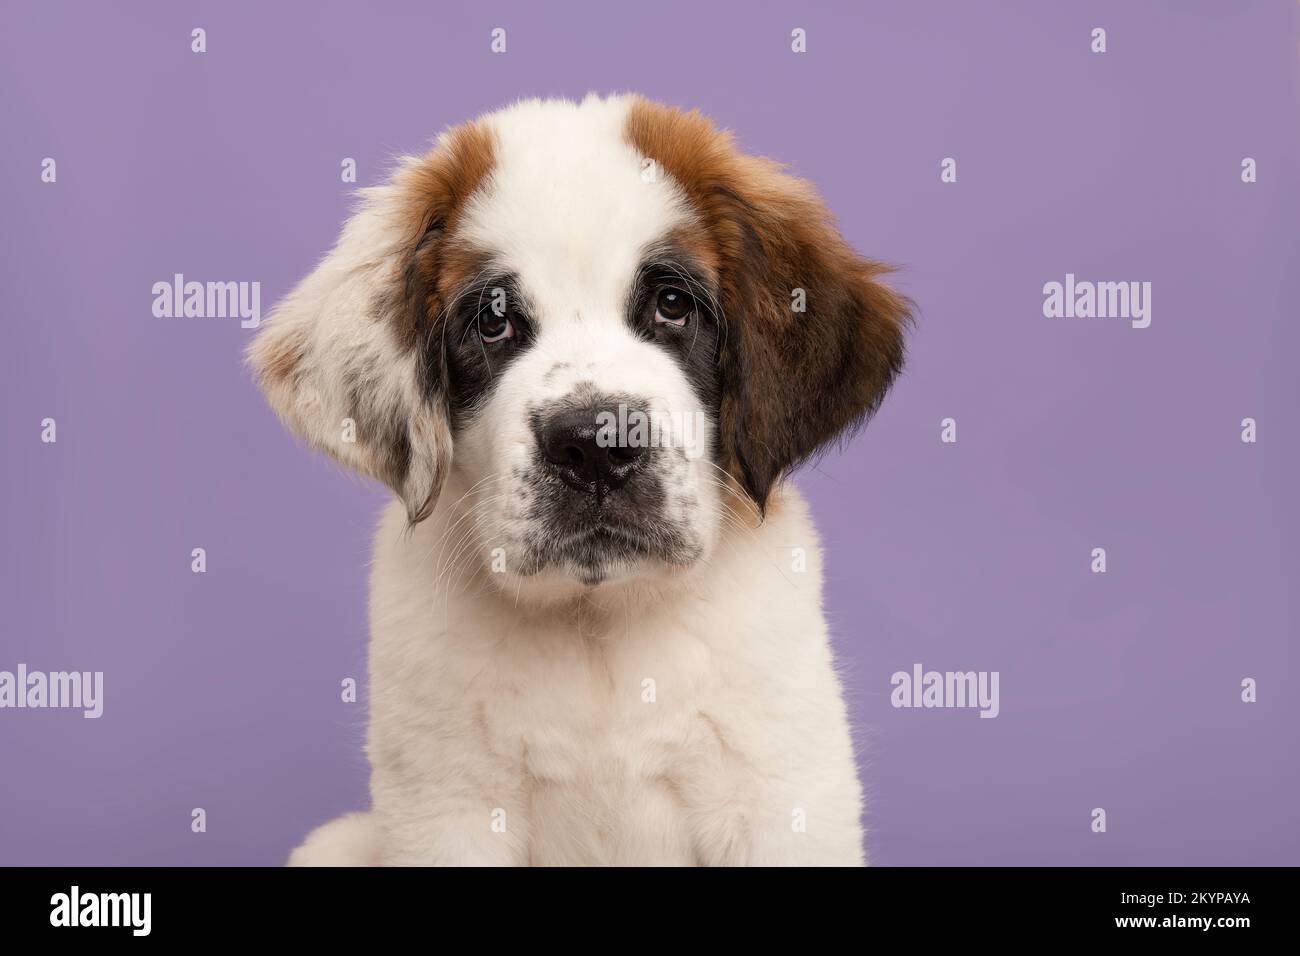 Saint Bernard puppy dog portrait looking at the camera, on a purple background Stock Photo